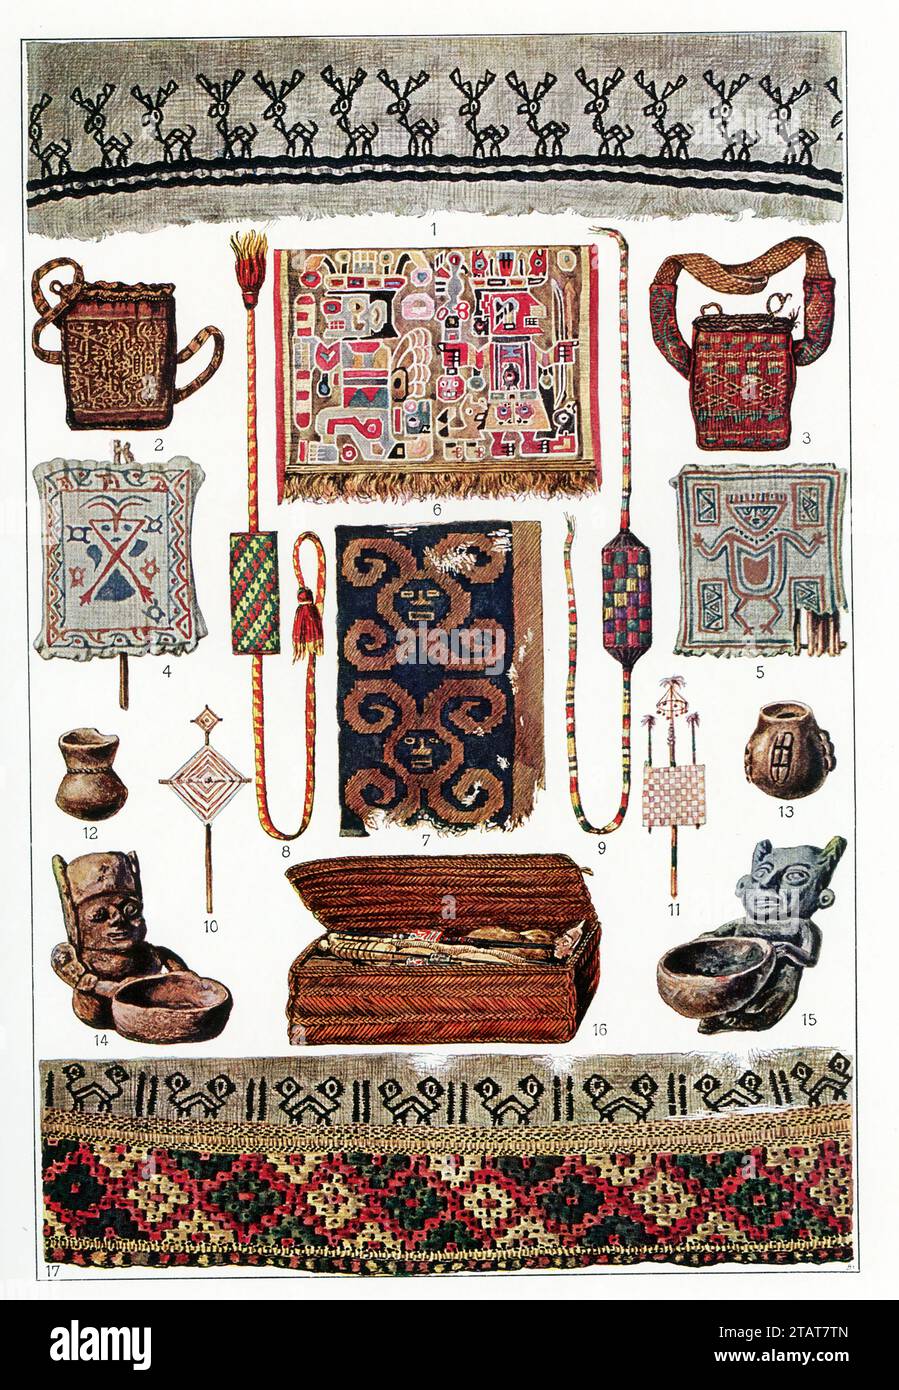 This 1907 image shows Peruvian artifacts from the time of the Inca. They are, from left to right, top to bottom: 1) Decorated border of woven cotton garment; 2-3) belts made of reed-lined fabric with ribbon to be placed around shoulder; 4-5) painted gravestones with cotton covering most likely a filigree of human figure – perhaps just adornment or a figure meant to subdue evil spirits; 6) dress robe fashioned as tapestry design; 7) ornamented garment; 8-9) ornamented braids placed in graces of those who died; 10-11) grave tablets made of reeds; 12-13) urns; 14-15) vessels with human figures fo Stock Photo